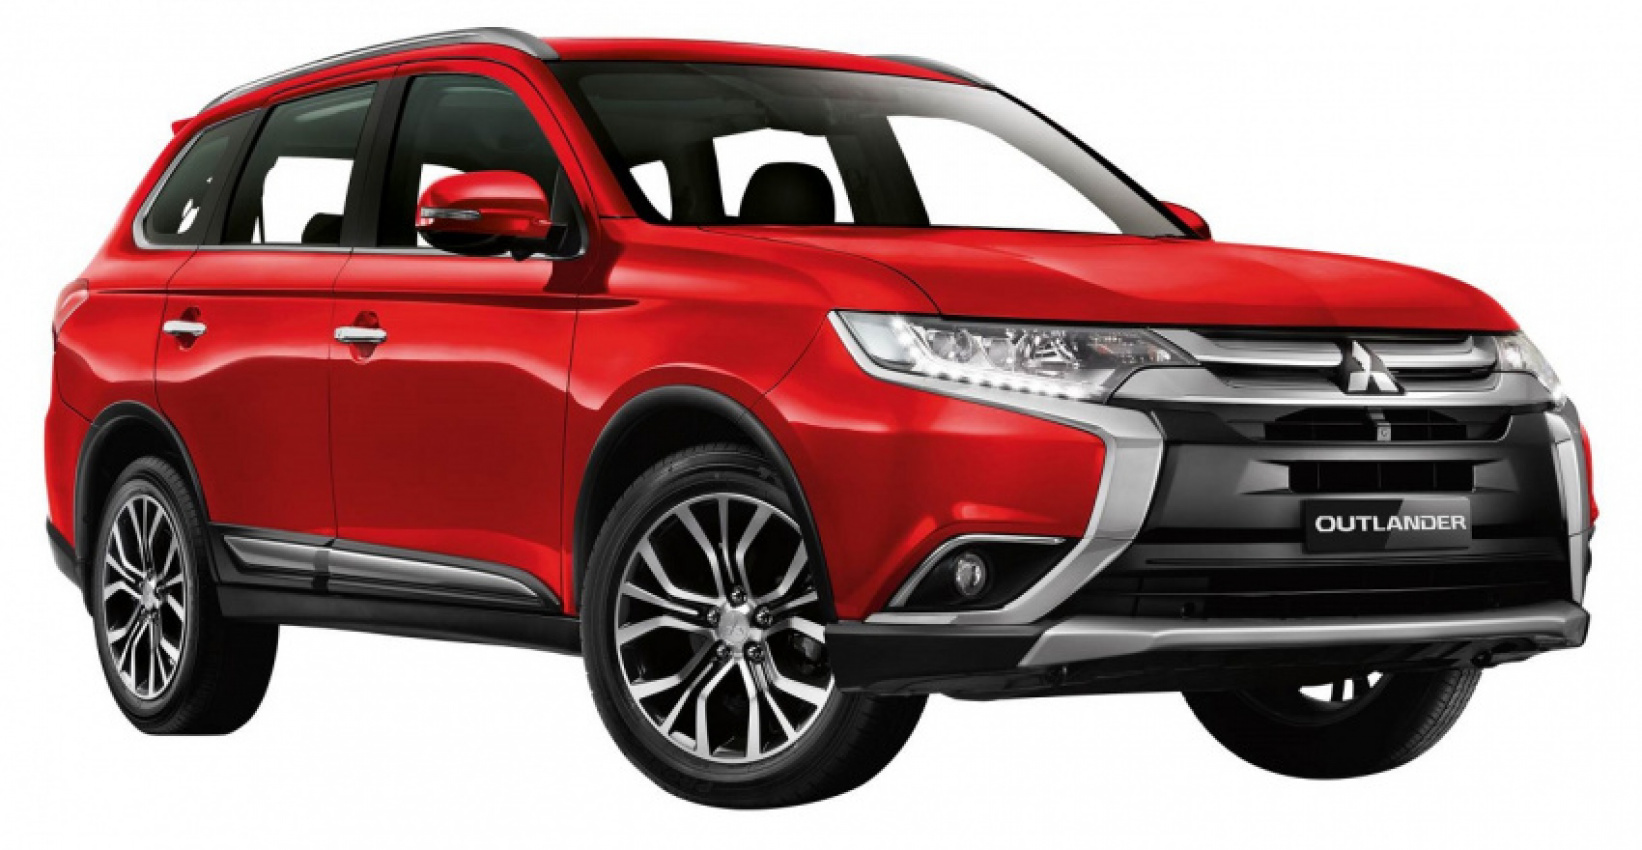 autos, car brands, cars, mitsubishi, chinese new year, malaysia, mitsubishi motors, mitsubishi motors malaysia, pick up truck, promotions, mitsubishi motors malaysia offers some prosperity bonus for chinese new year